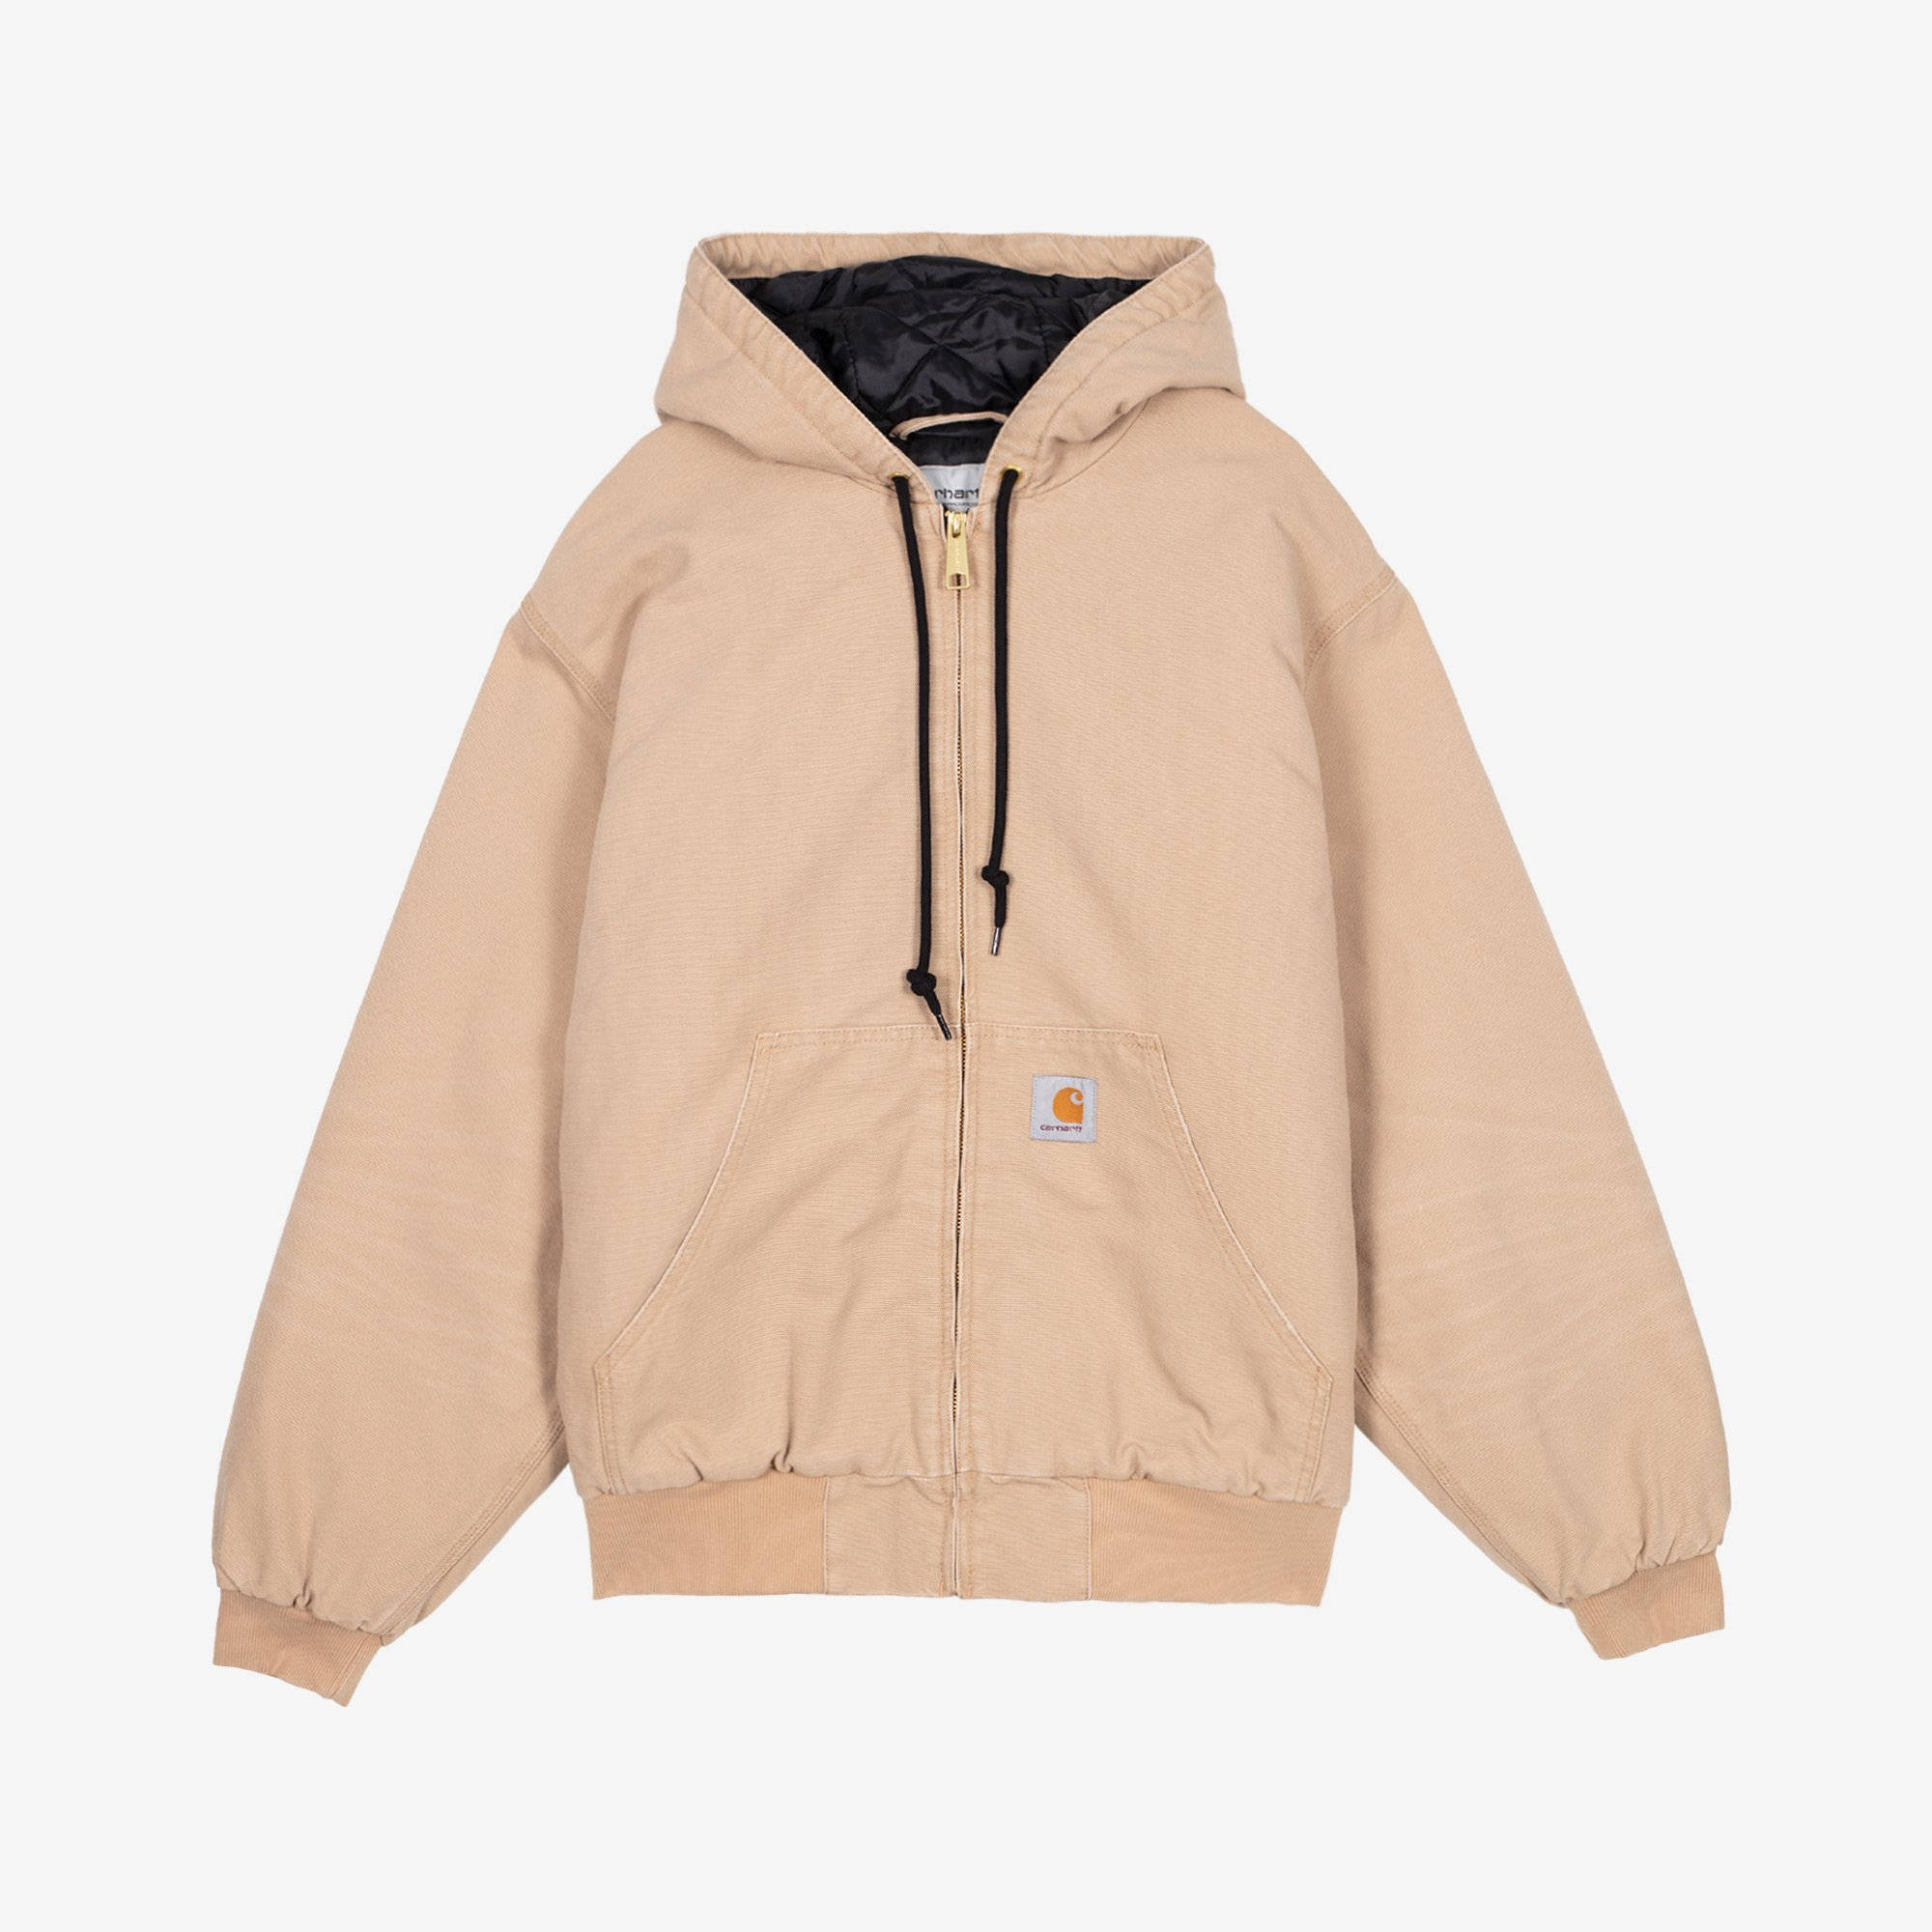 Carhartt OG Active Jacket - Dusty Brown | The Sole Supplier